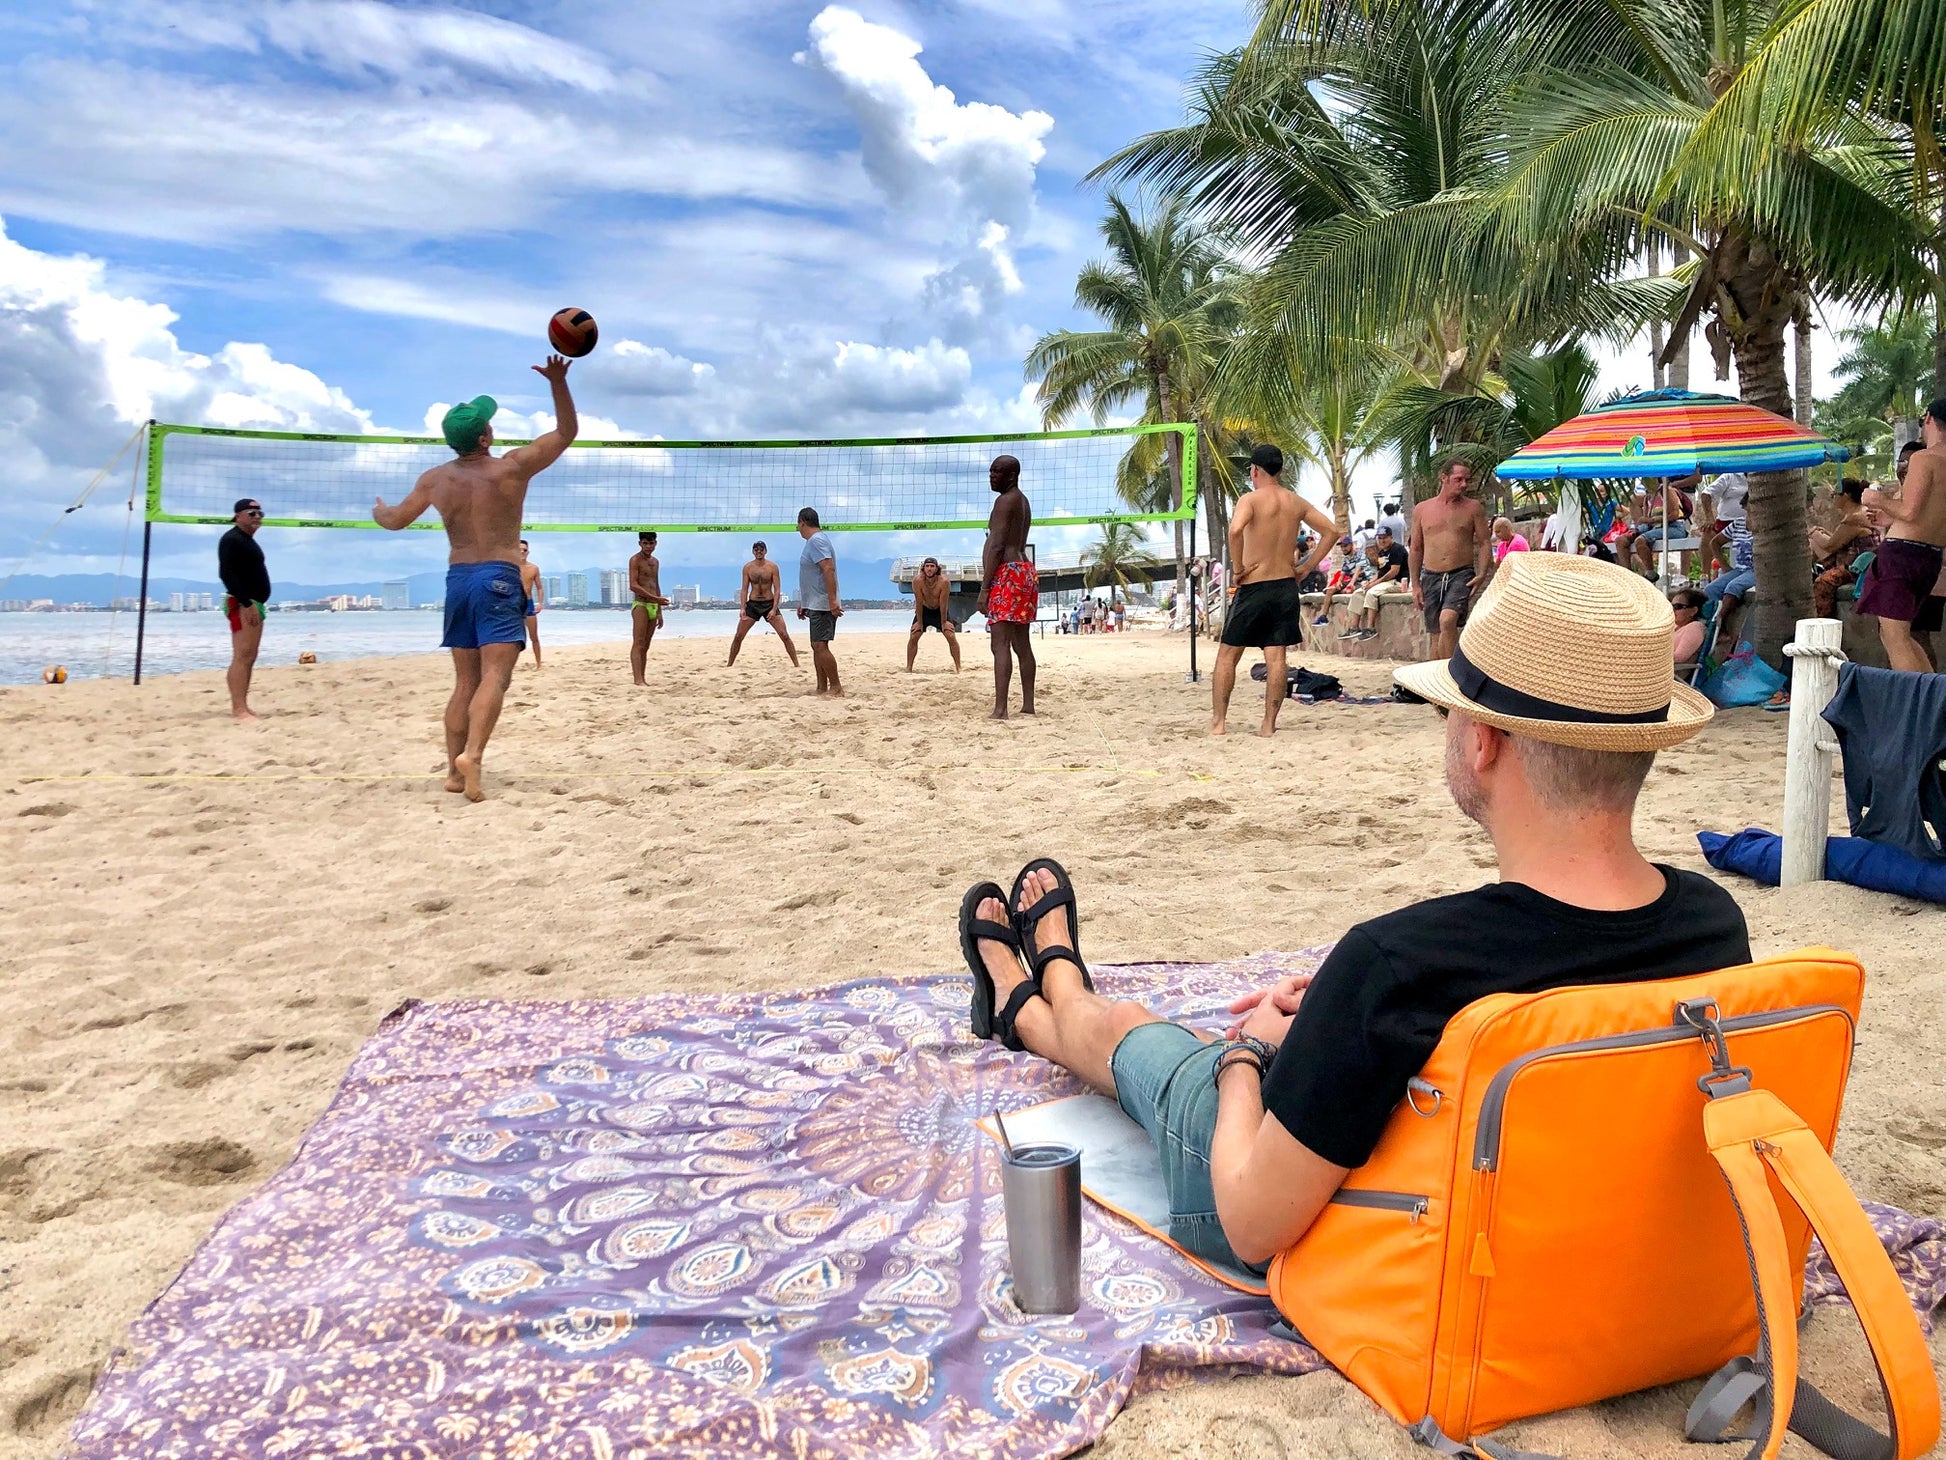 A man with a hat observes a sand volleyball game while using his Playamigo beach chair.